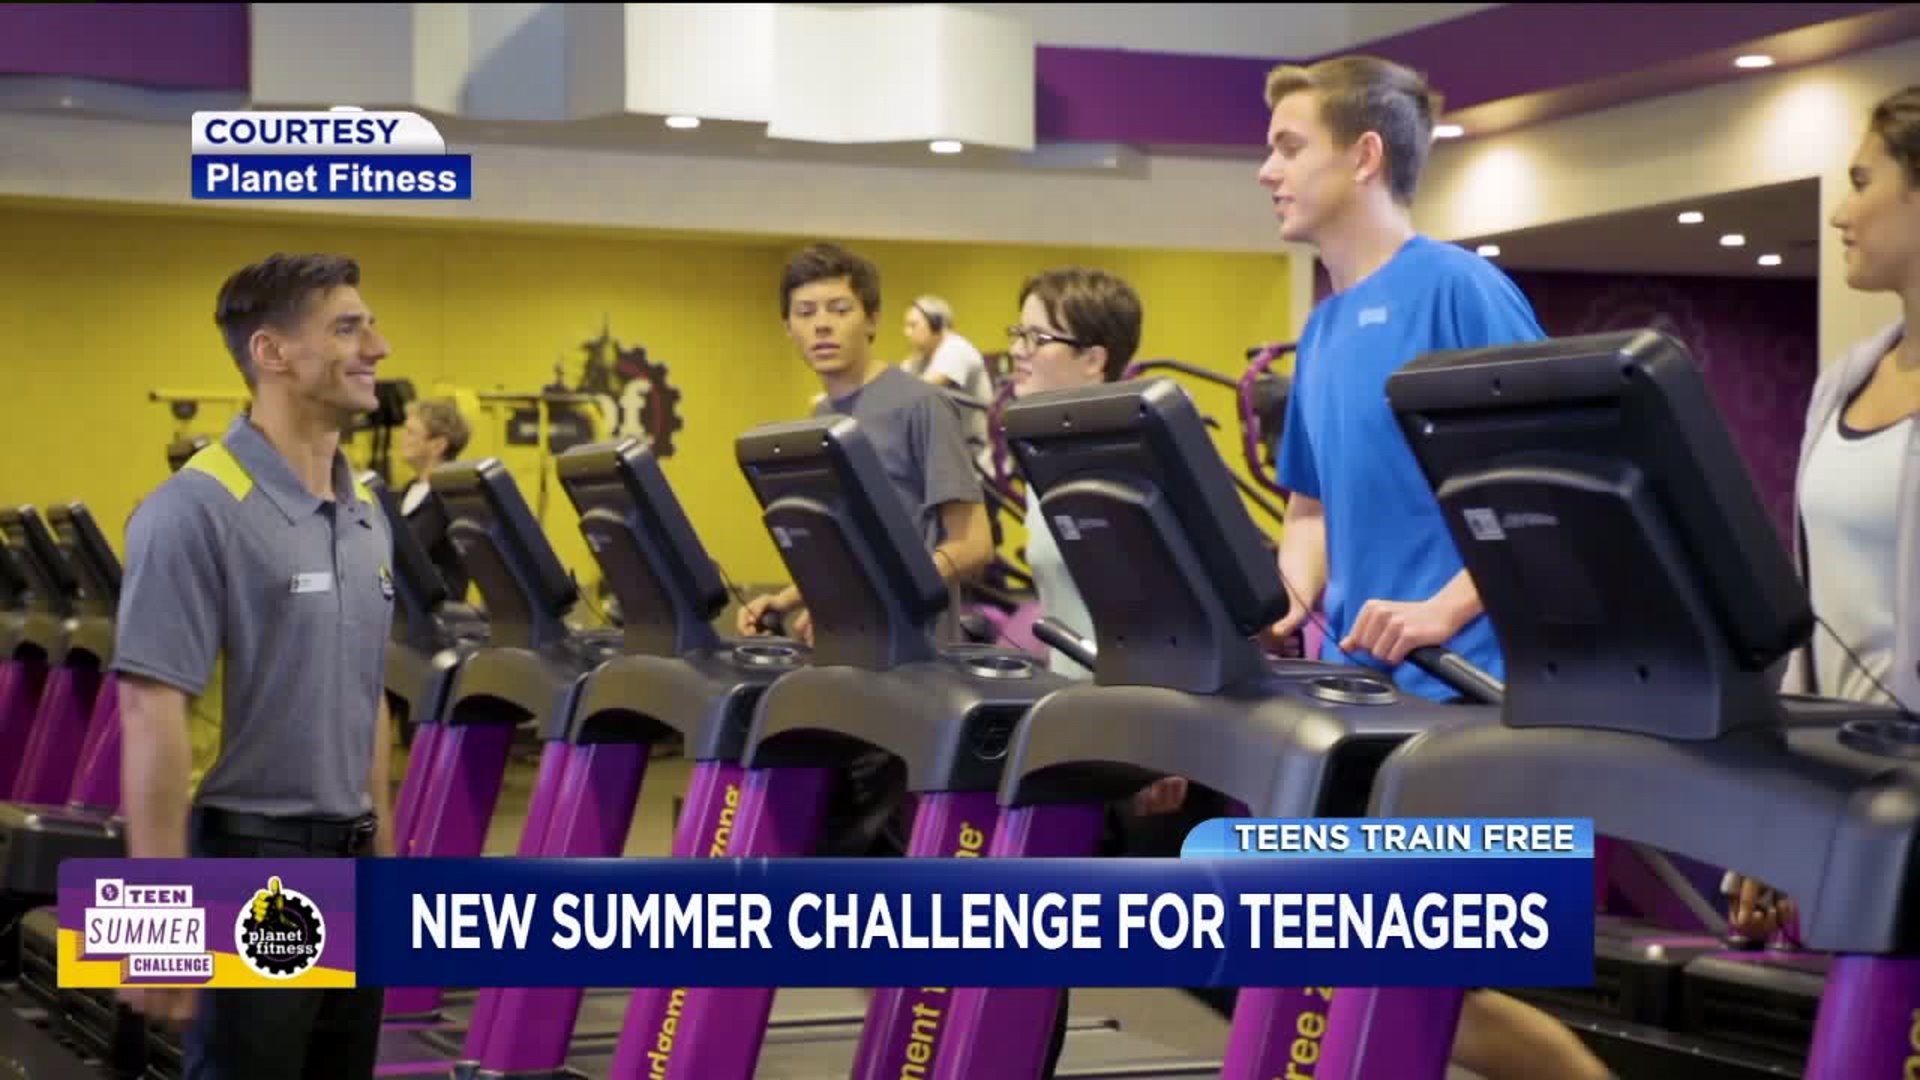 planet fitness age limit to go alone